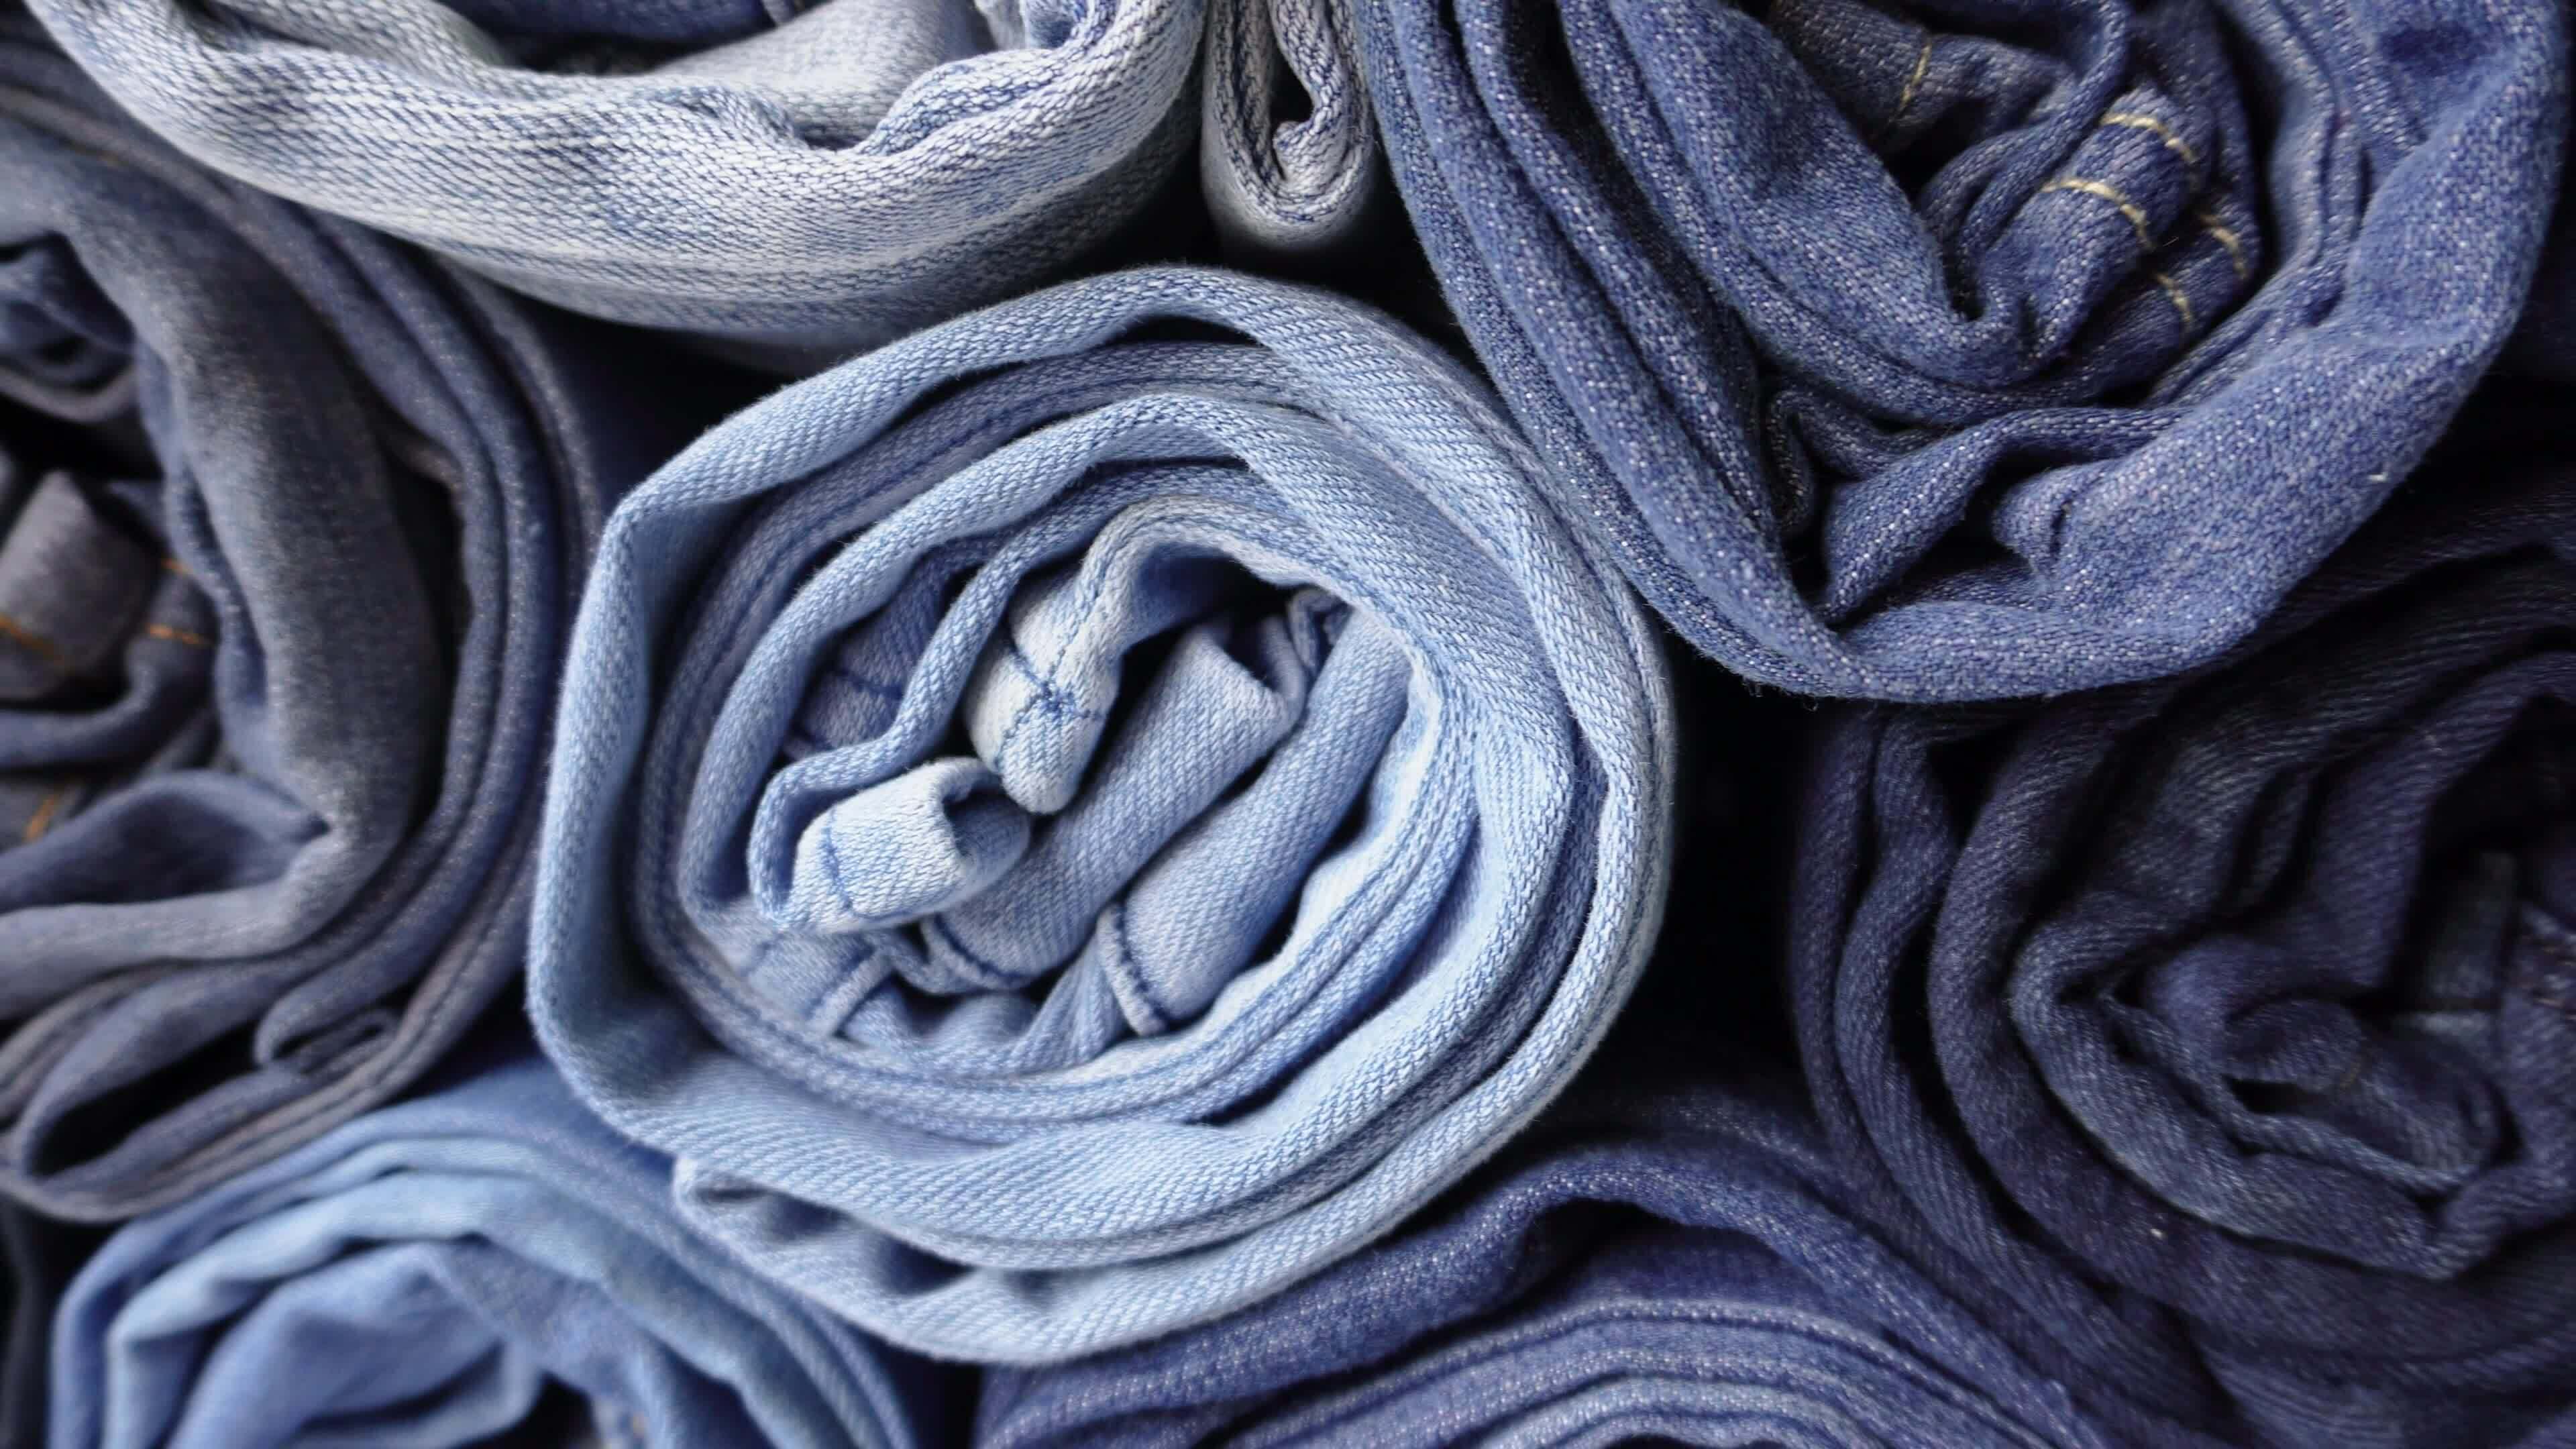 Stack of Various Shades of Rolled Up Denim Jeans 35141240 Stock Video ...